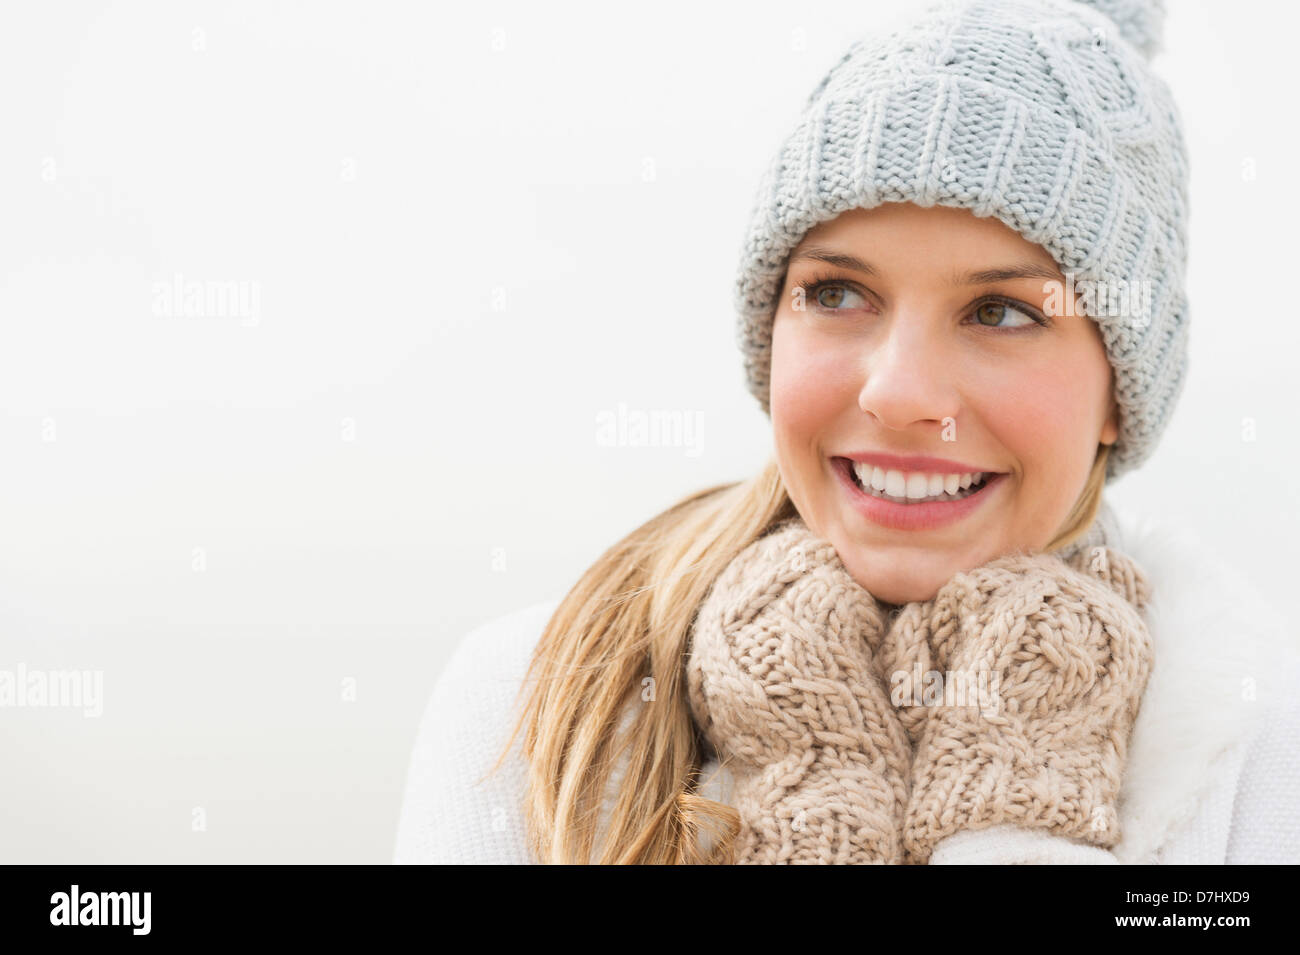 Portrait of woman in winter clothing Stock Photo